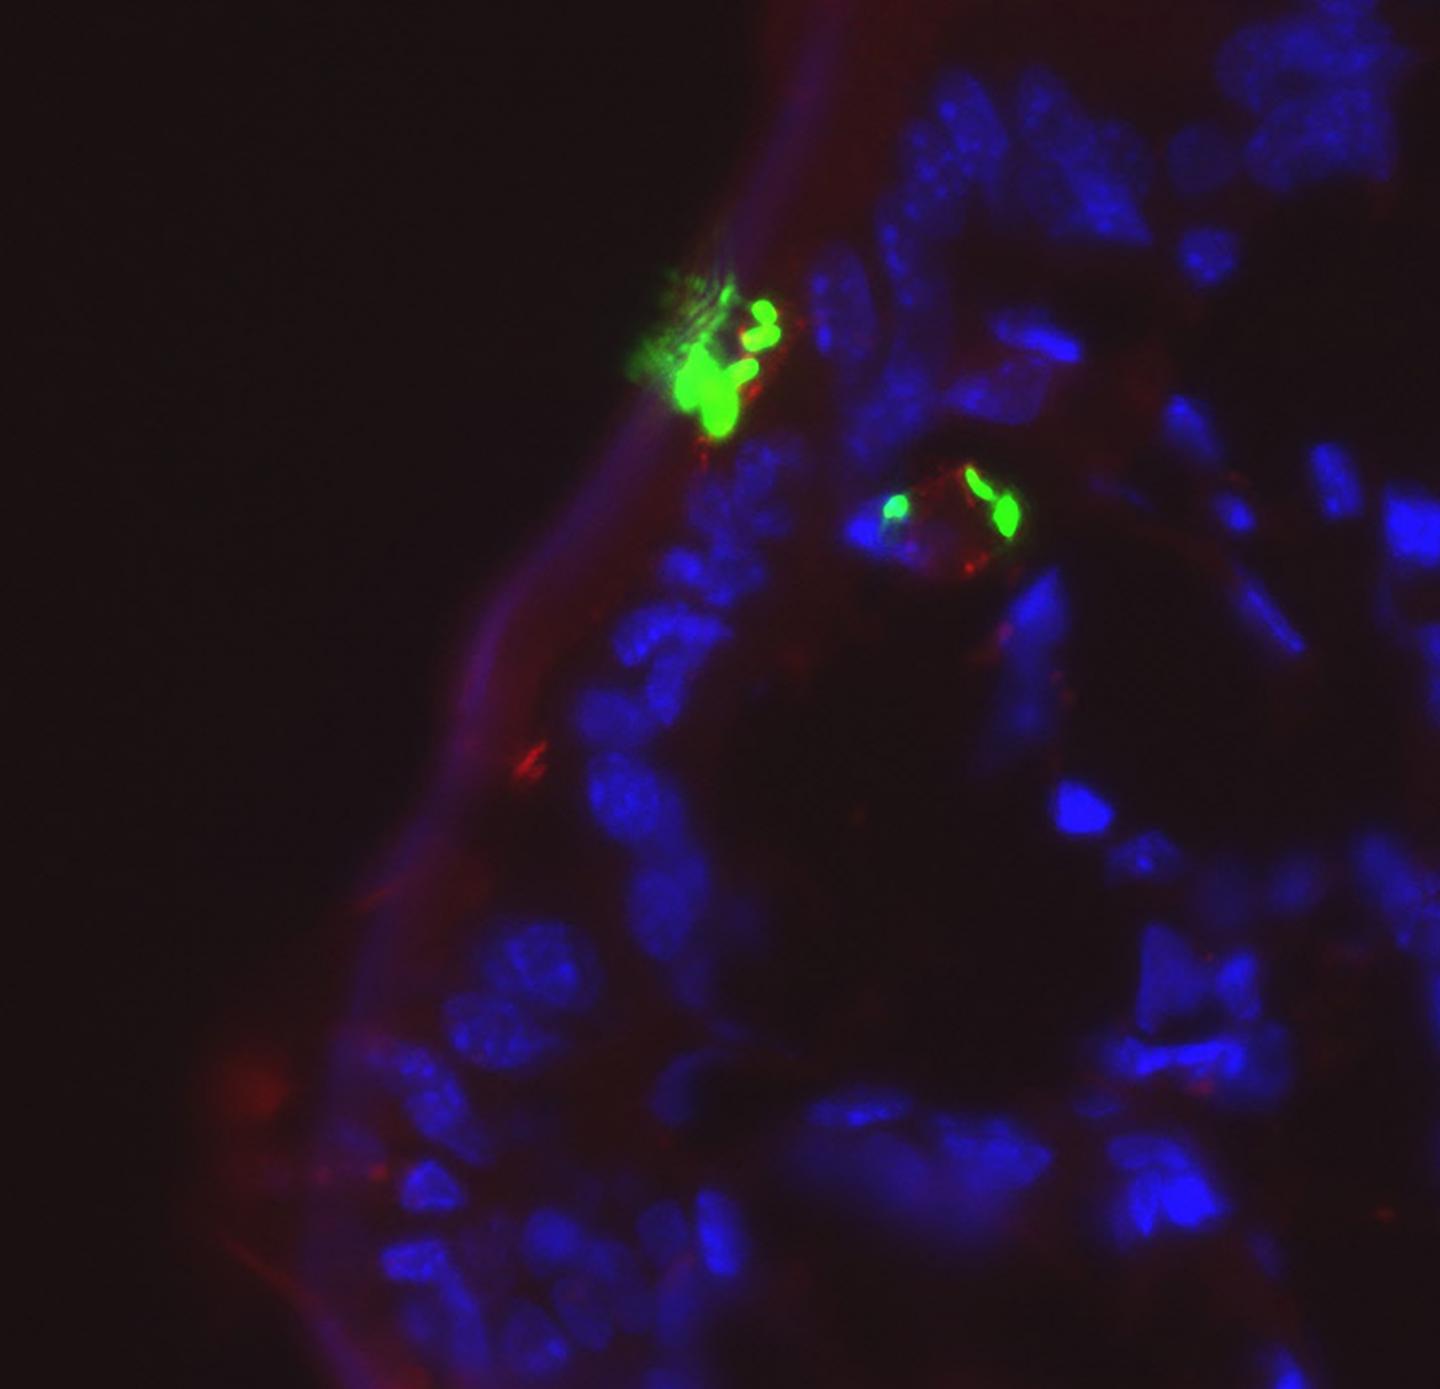 Gut-Residing E. Coli (Green) Can Utilize Goblet Cells (Red) to Cross the Intestinal Epithelium